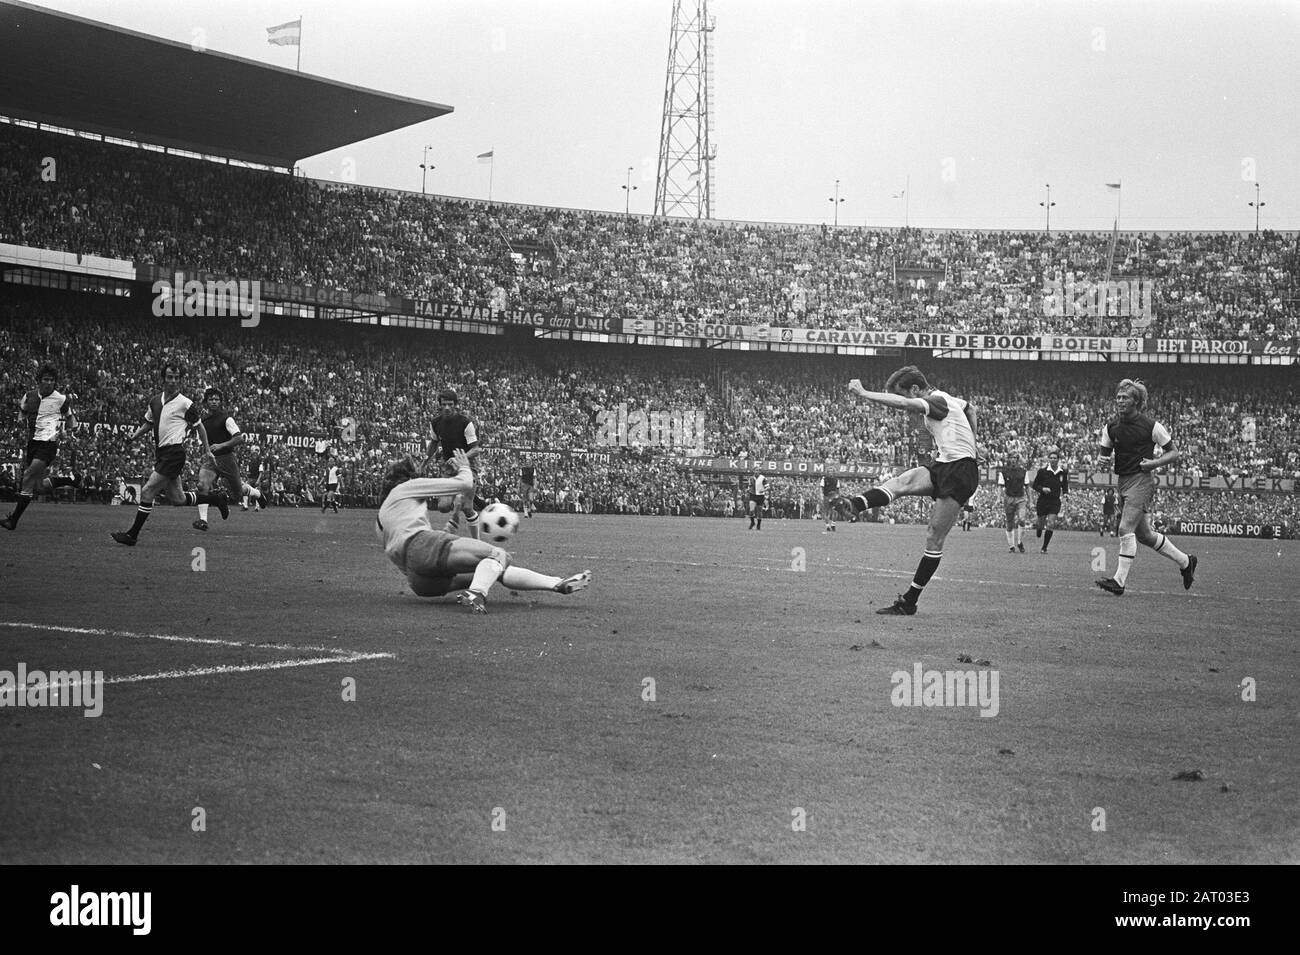 Feyenoord against Haarlem 2-1  Goal of Kindvall; by victory is Feyenoord champion Date: 6 June 1971 Location: Rotterdam, Zuid-Holland Keywords: goals, champions, sports, soccer, etc. footballers, matches Personal name: Kindvall, Ove Institution name: Feyenoord Stock Photo